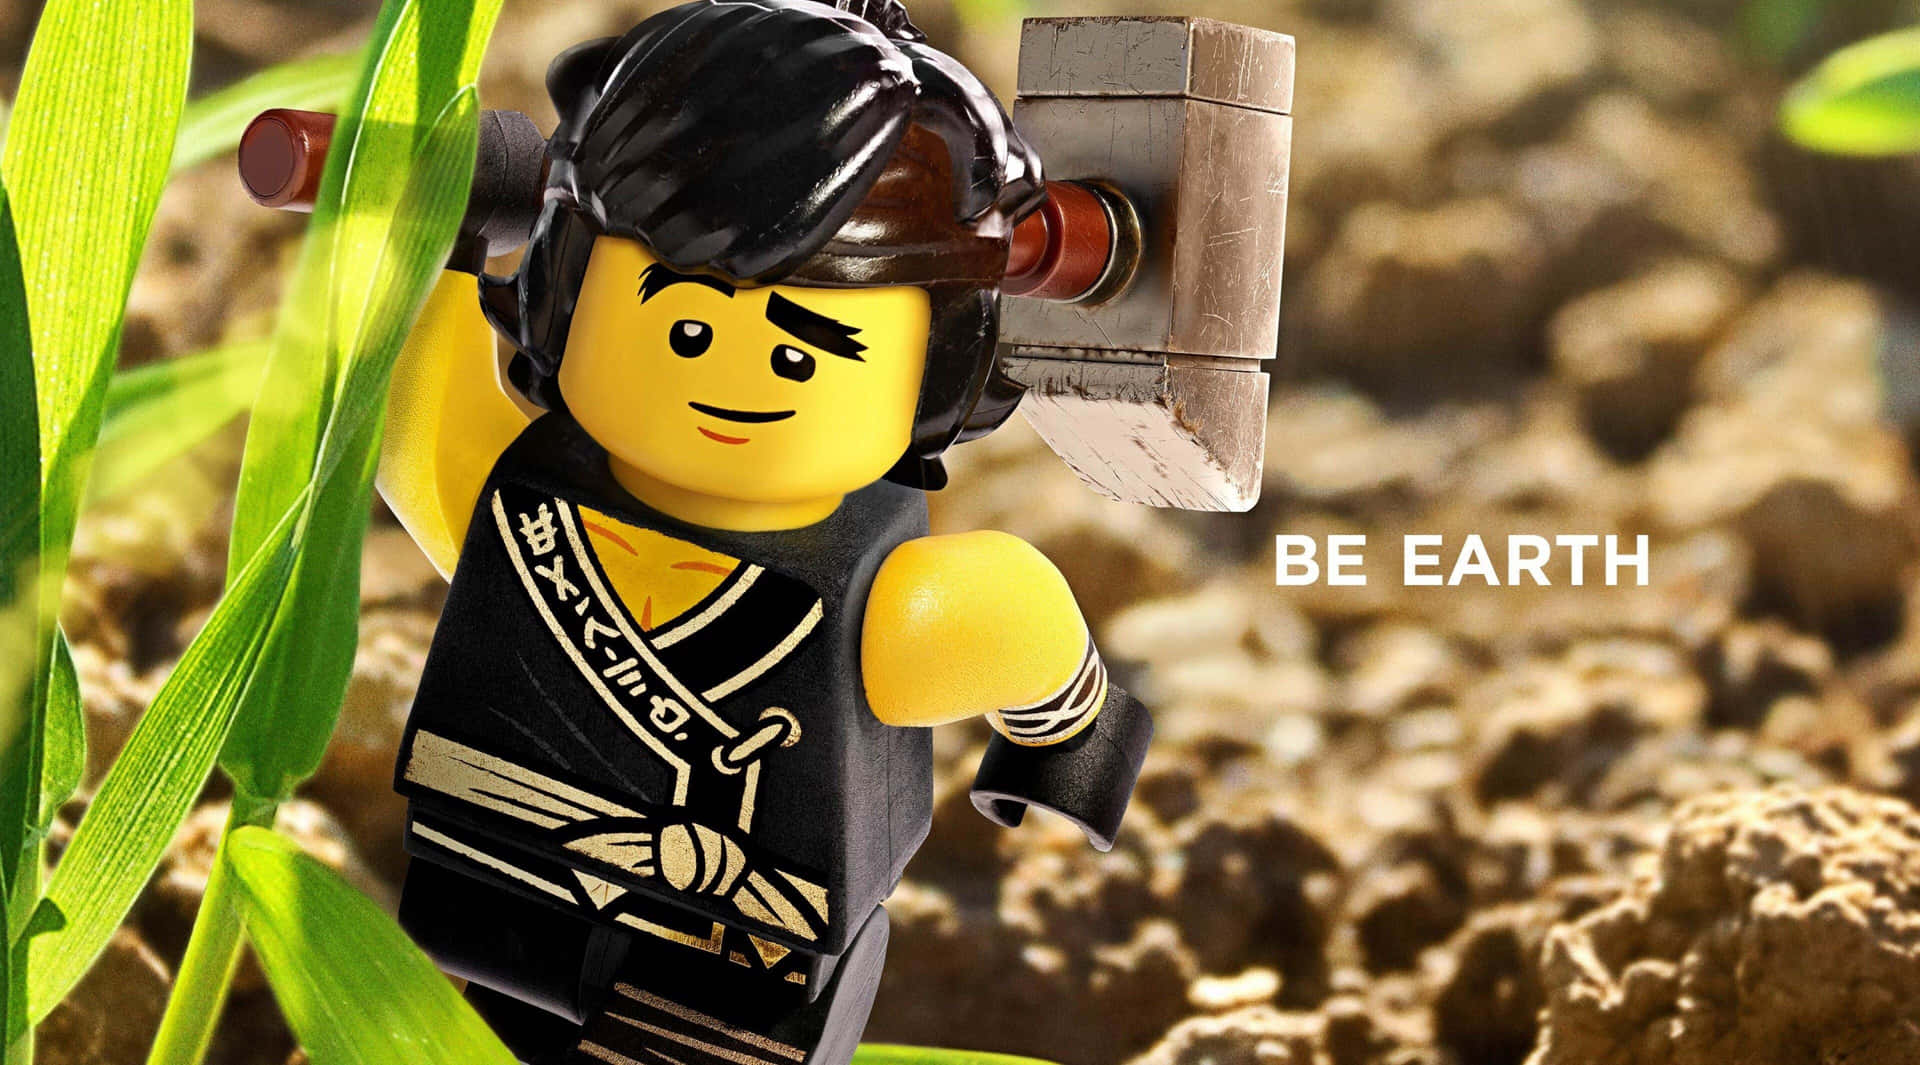 The spectacular world of Ninjago, featuring Lego ninjas and powerful dragons.